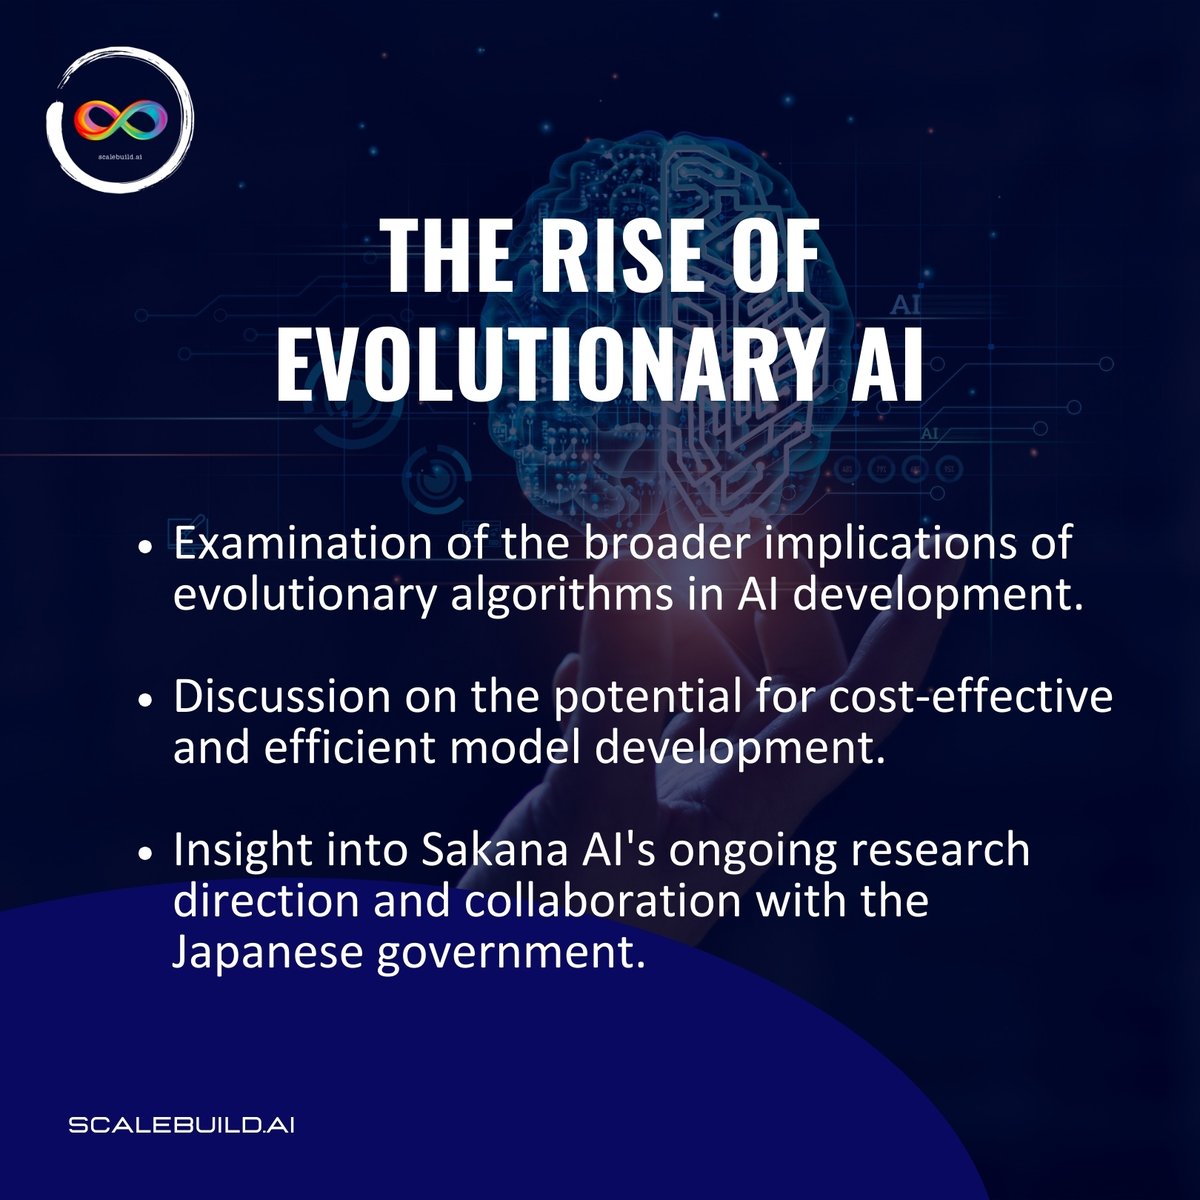 Sakana AI unveils revolutionary approach to model development, introducing Evolutionary Model Merge for creating state-of-the-art foundation models.
.
.
.
#SakanaAI #ModelDevelopment #EvolutionaryAI #JapaneseLanguage #VisionModels #AIInnovation #Technology #Research